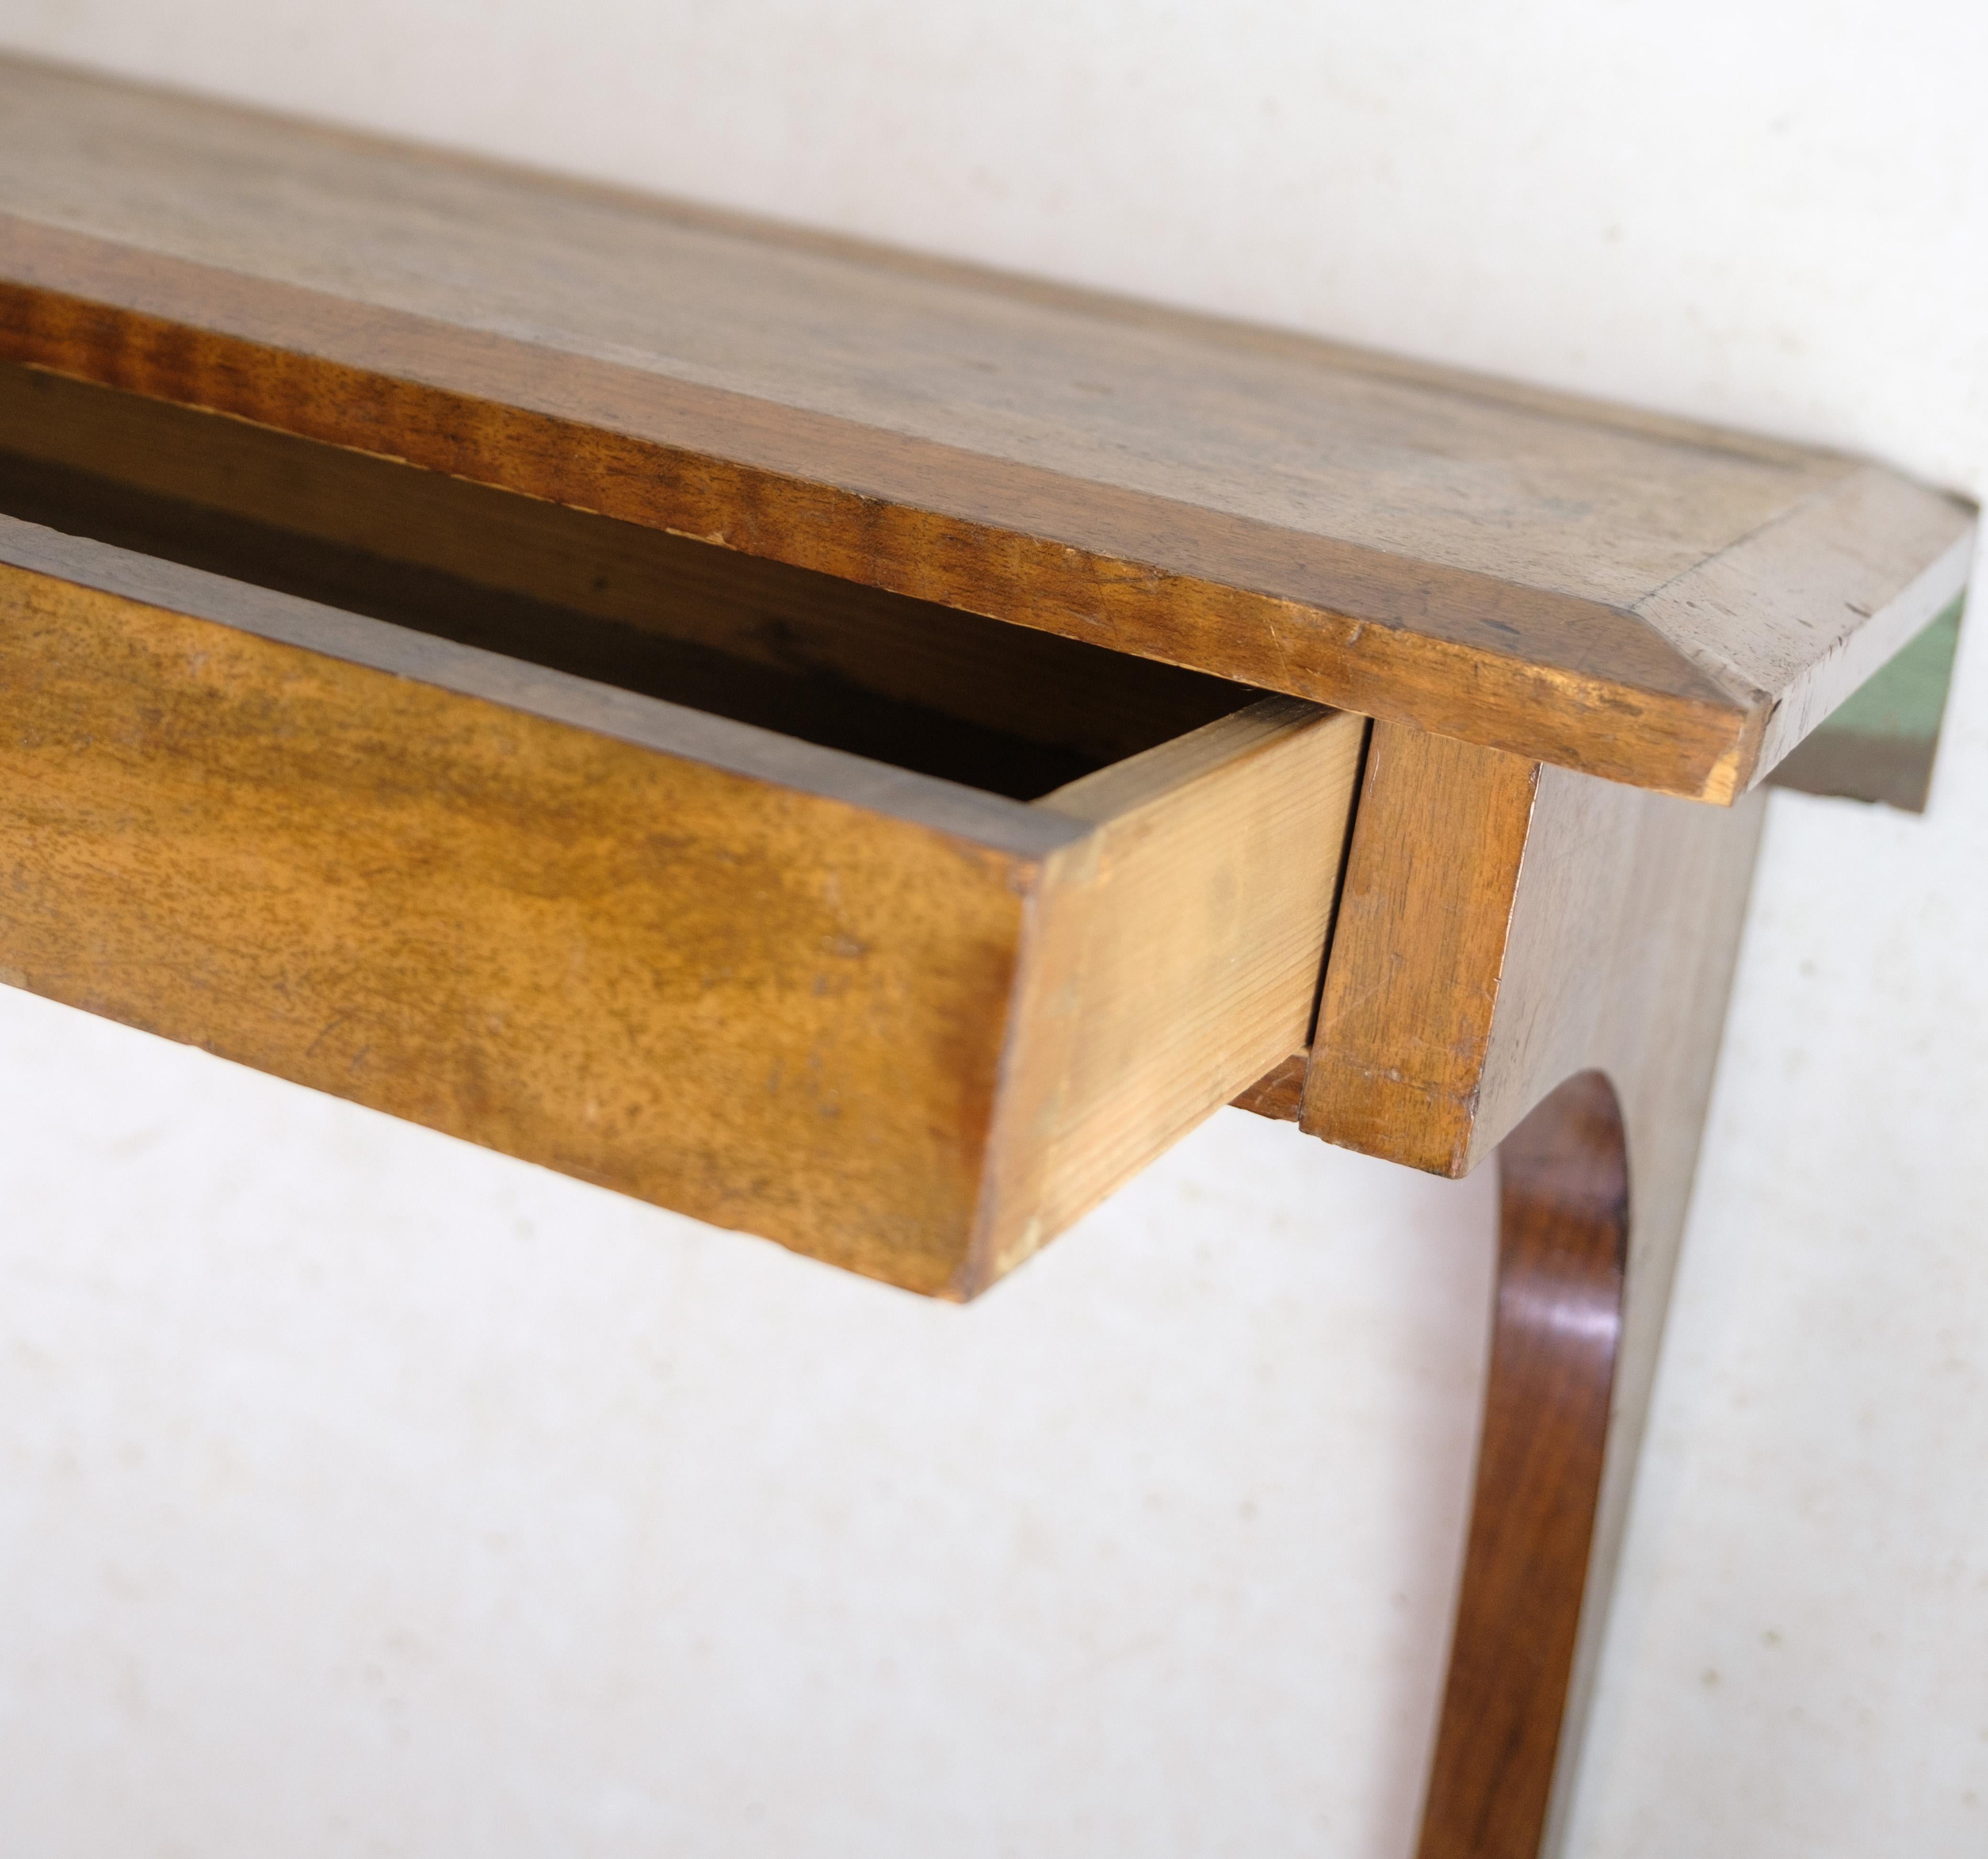 Suspended wall console with drawer made of walnut from around the 1920s.
H:46 W:79